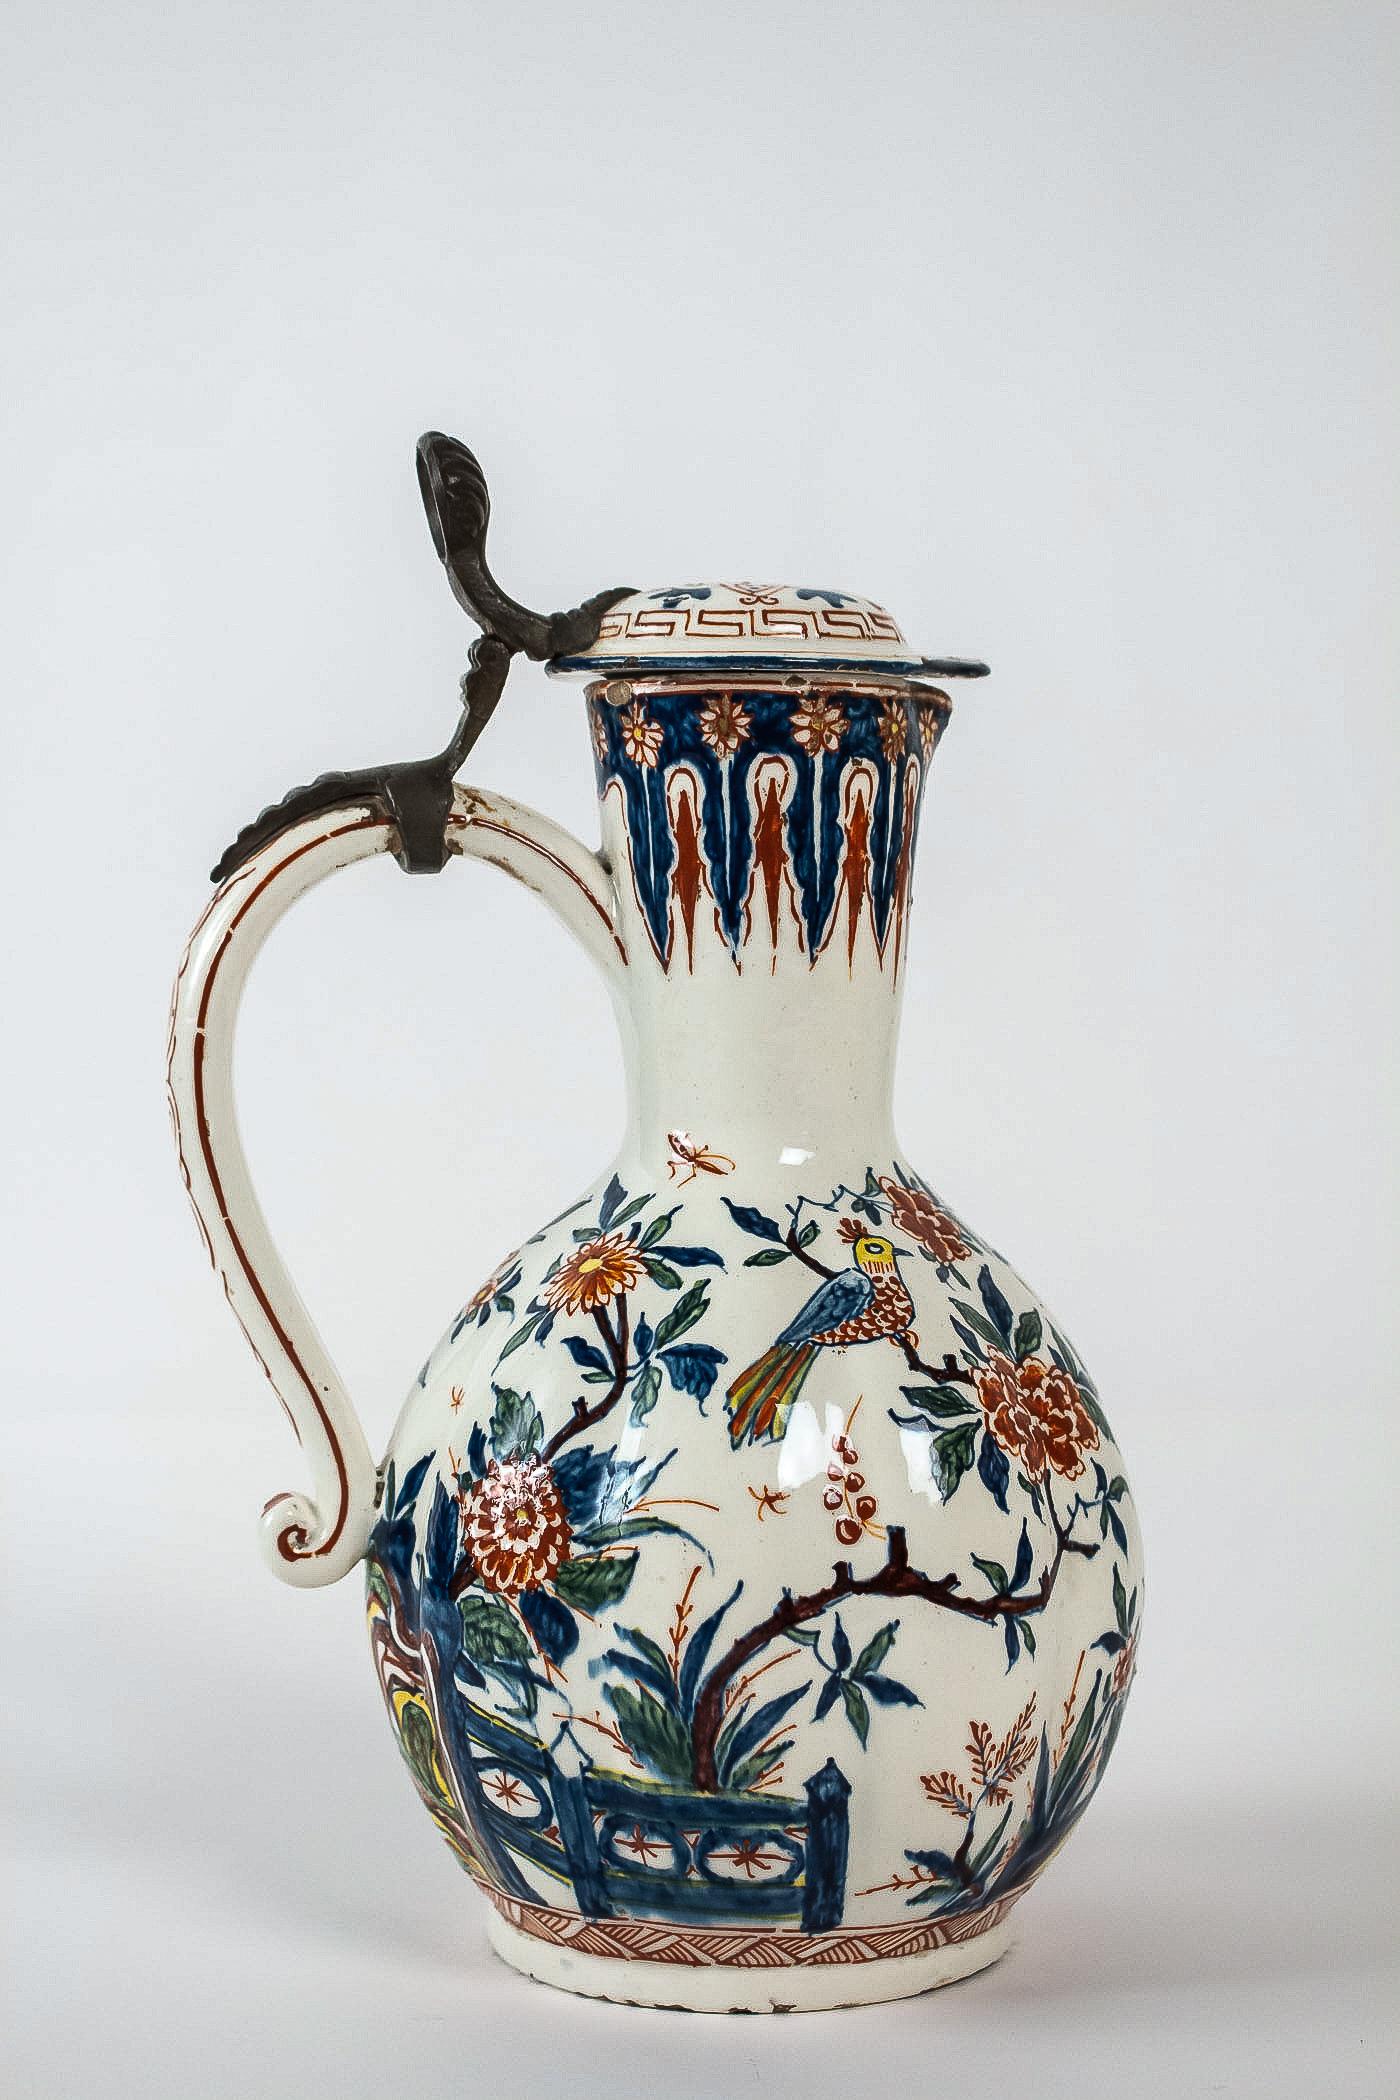 Sign CK, Rare delft Polychrome Faience Pitcher, circa 1700

A rare delft faience pitcher with polychrome decorations of birds, flowers, barriers, clouds, and insects. Our pitcher has the particularity of being complete, with its pewter hinge
The